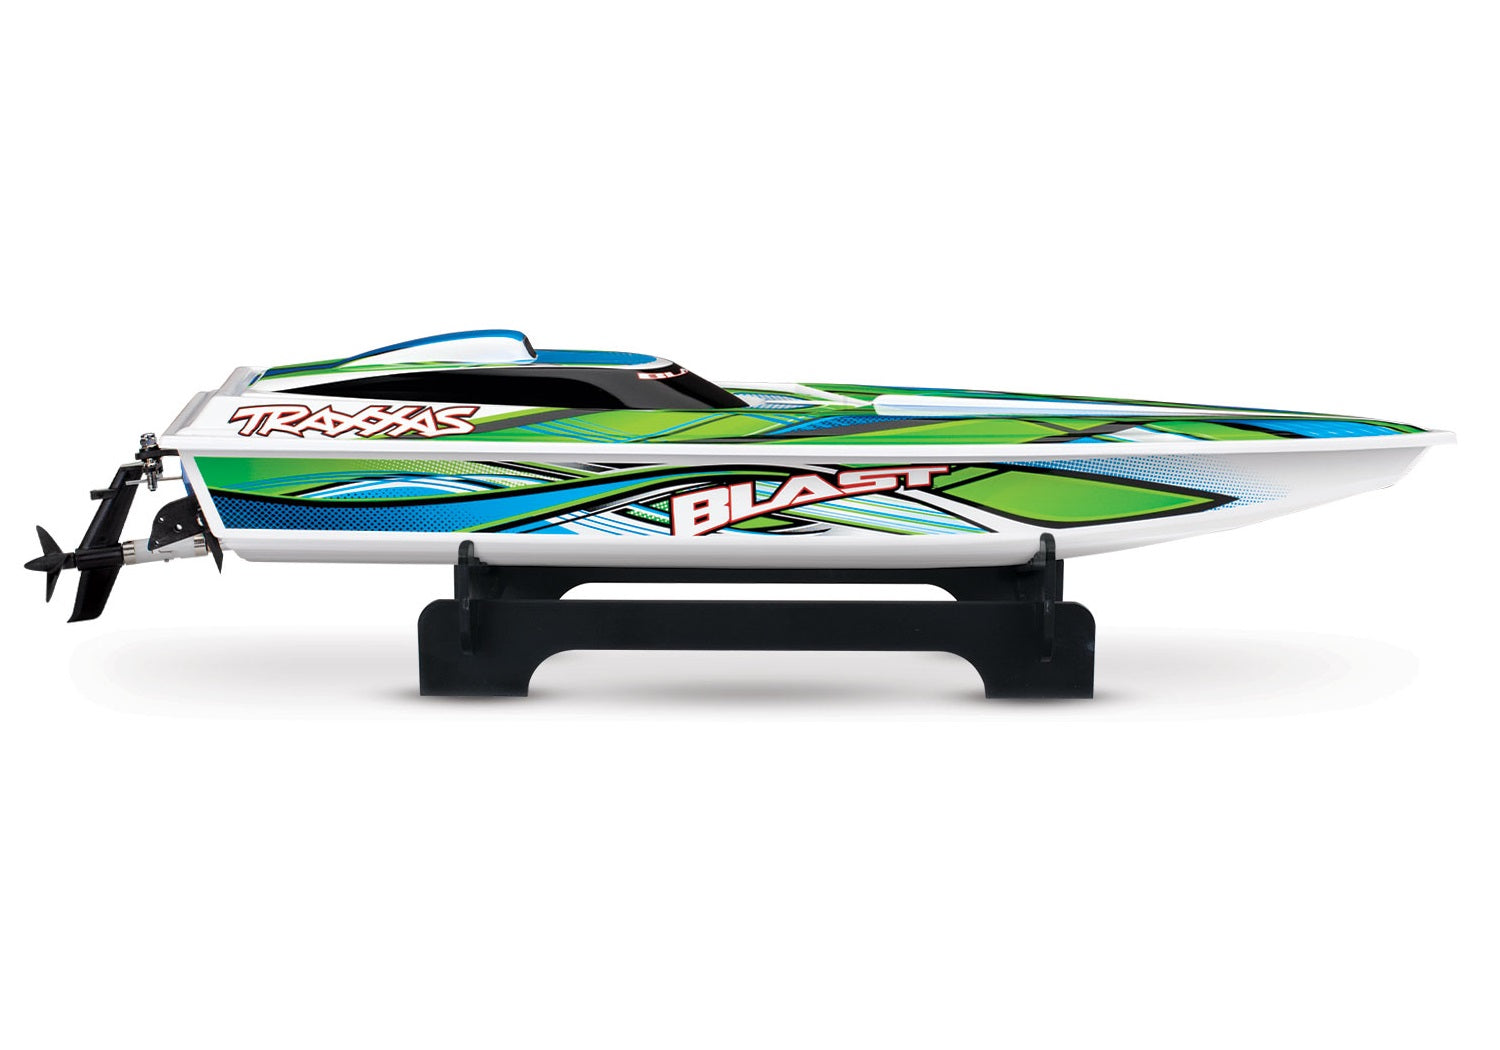 38104-8 Green Blast: High Performance Race Boat with TQ™ 2.4GHz Radio System